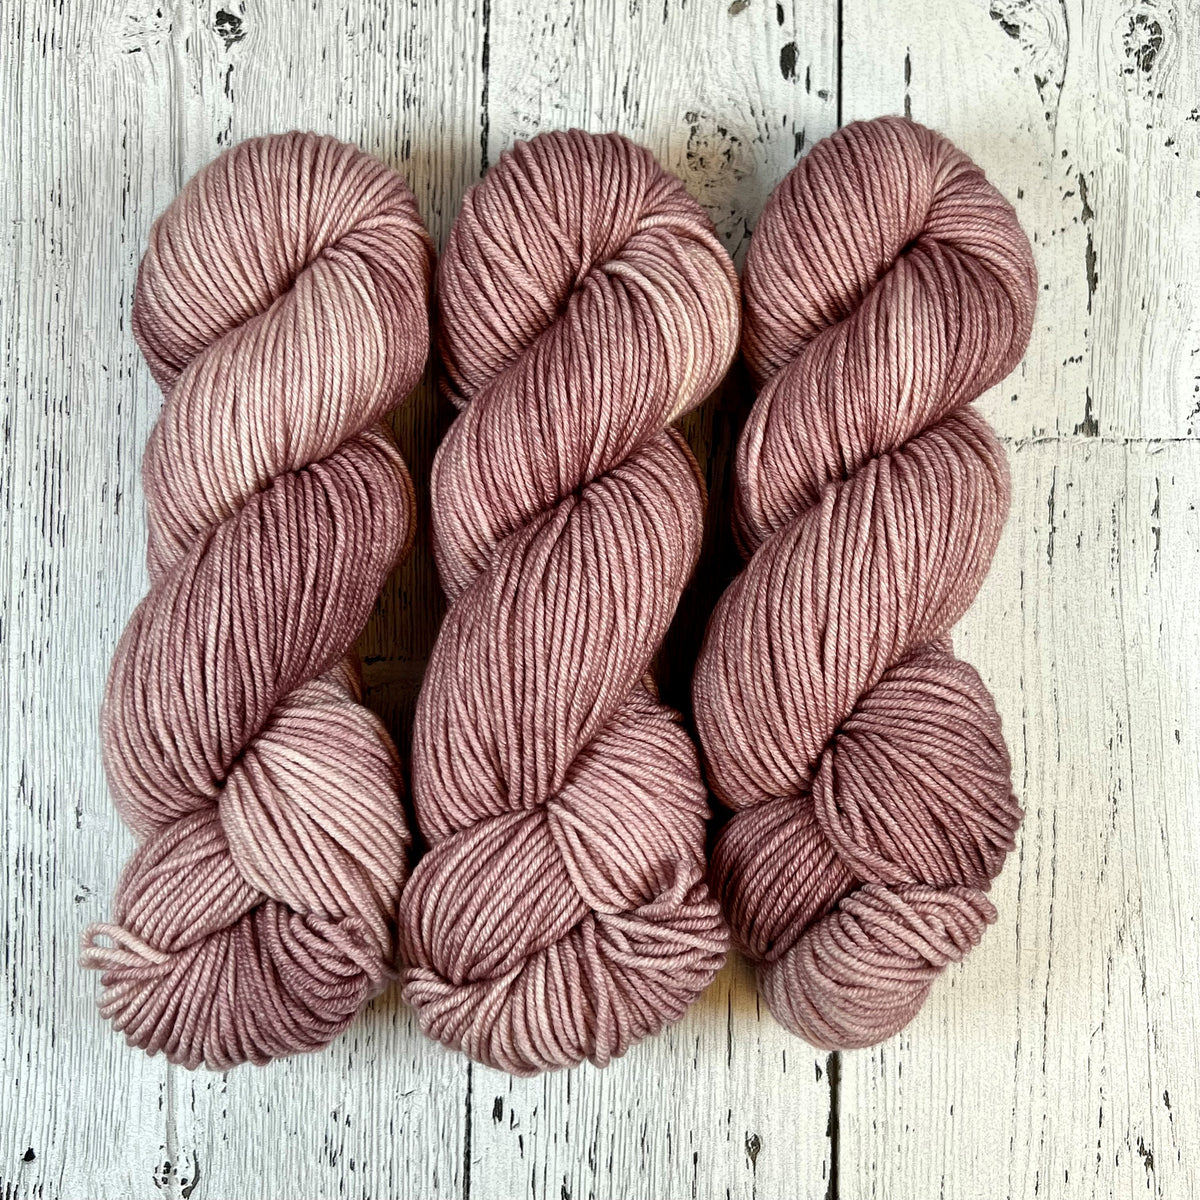 Dusty Rose - Fioritura Worsted - Dyed Stock